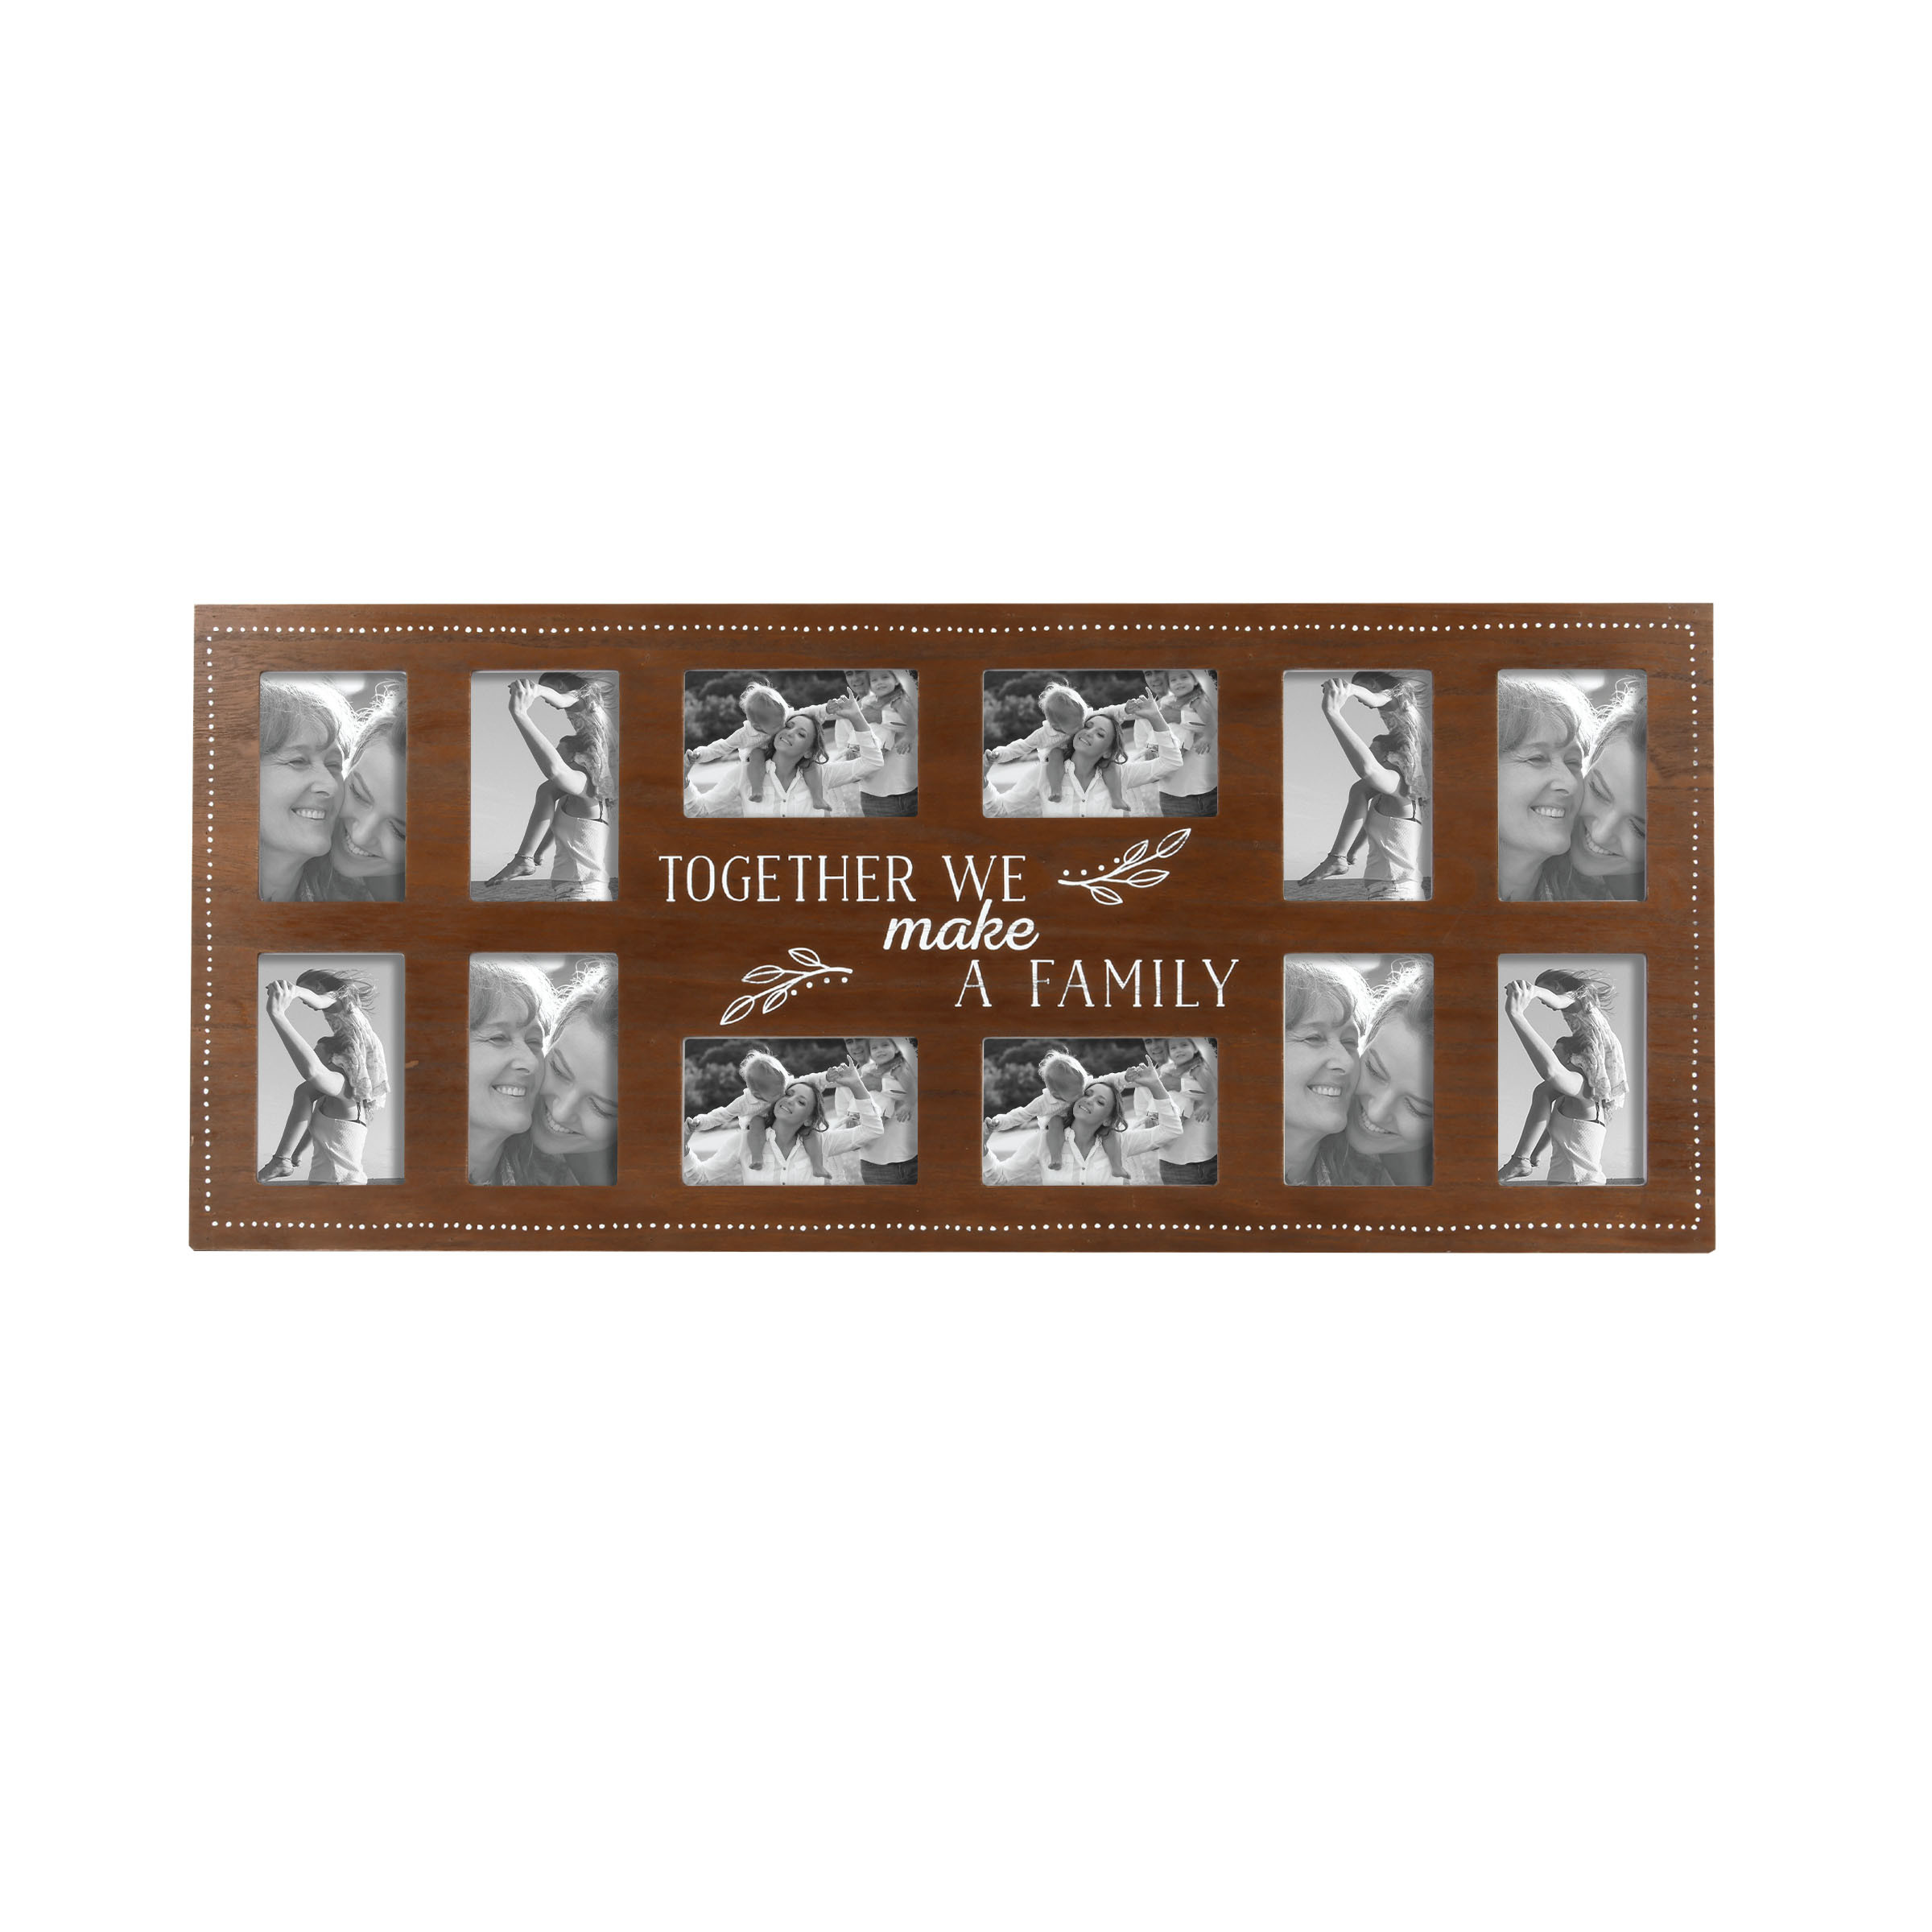 Prinz 12-Opening 'Together' Wall Hanging Collage Picture Frame, for 4"x6" Photos, Dark Brown - image 1 of 5